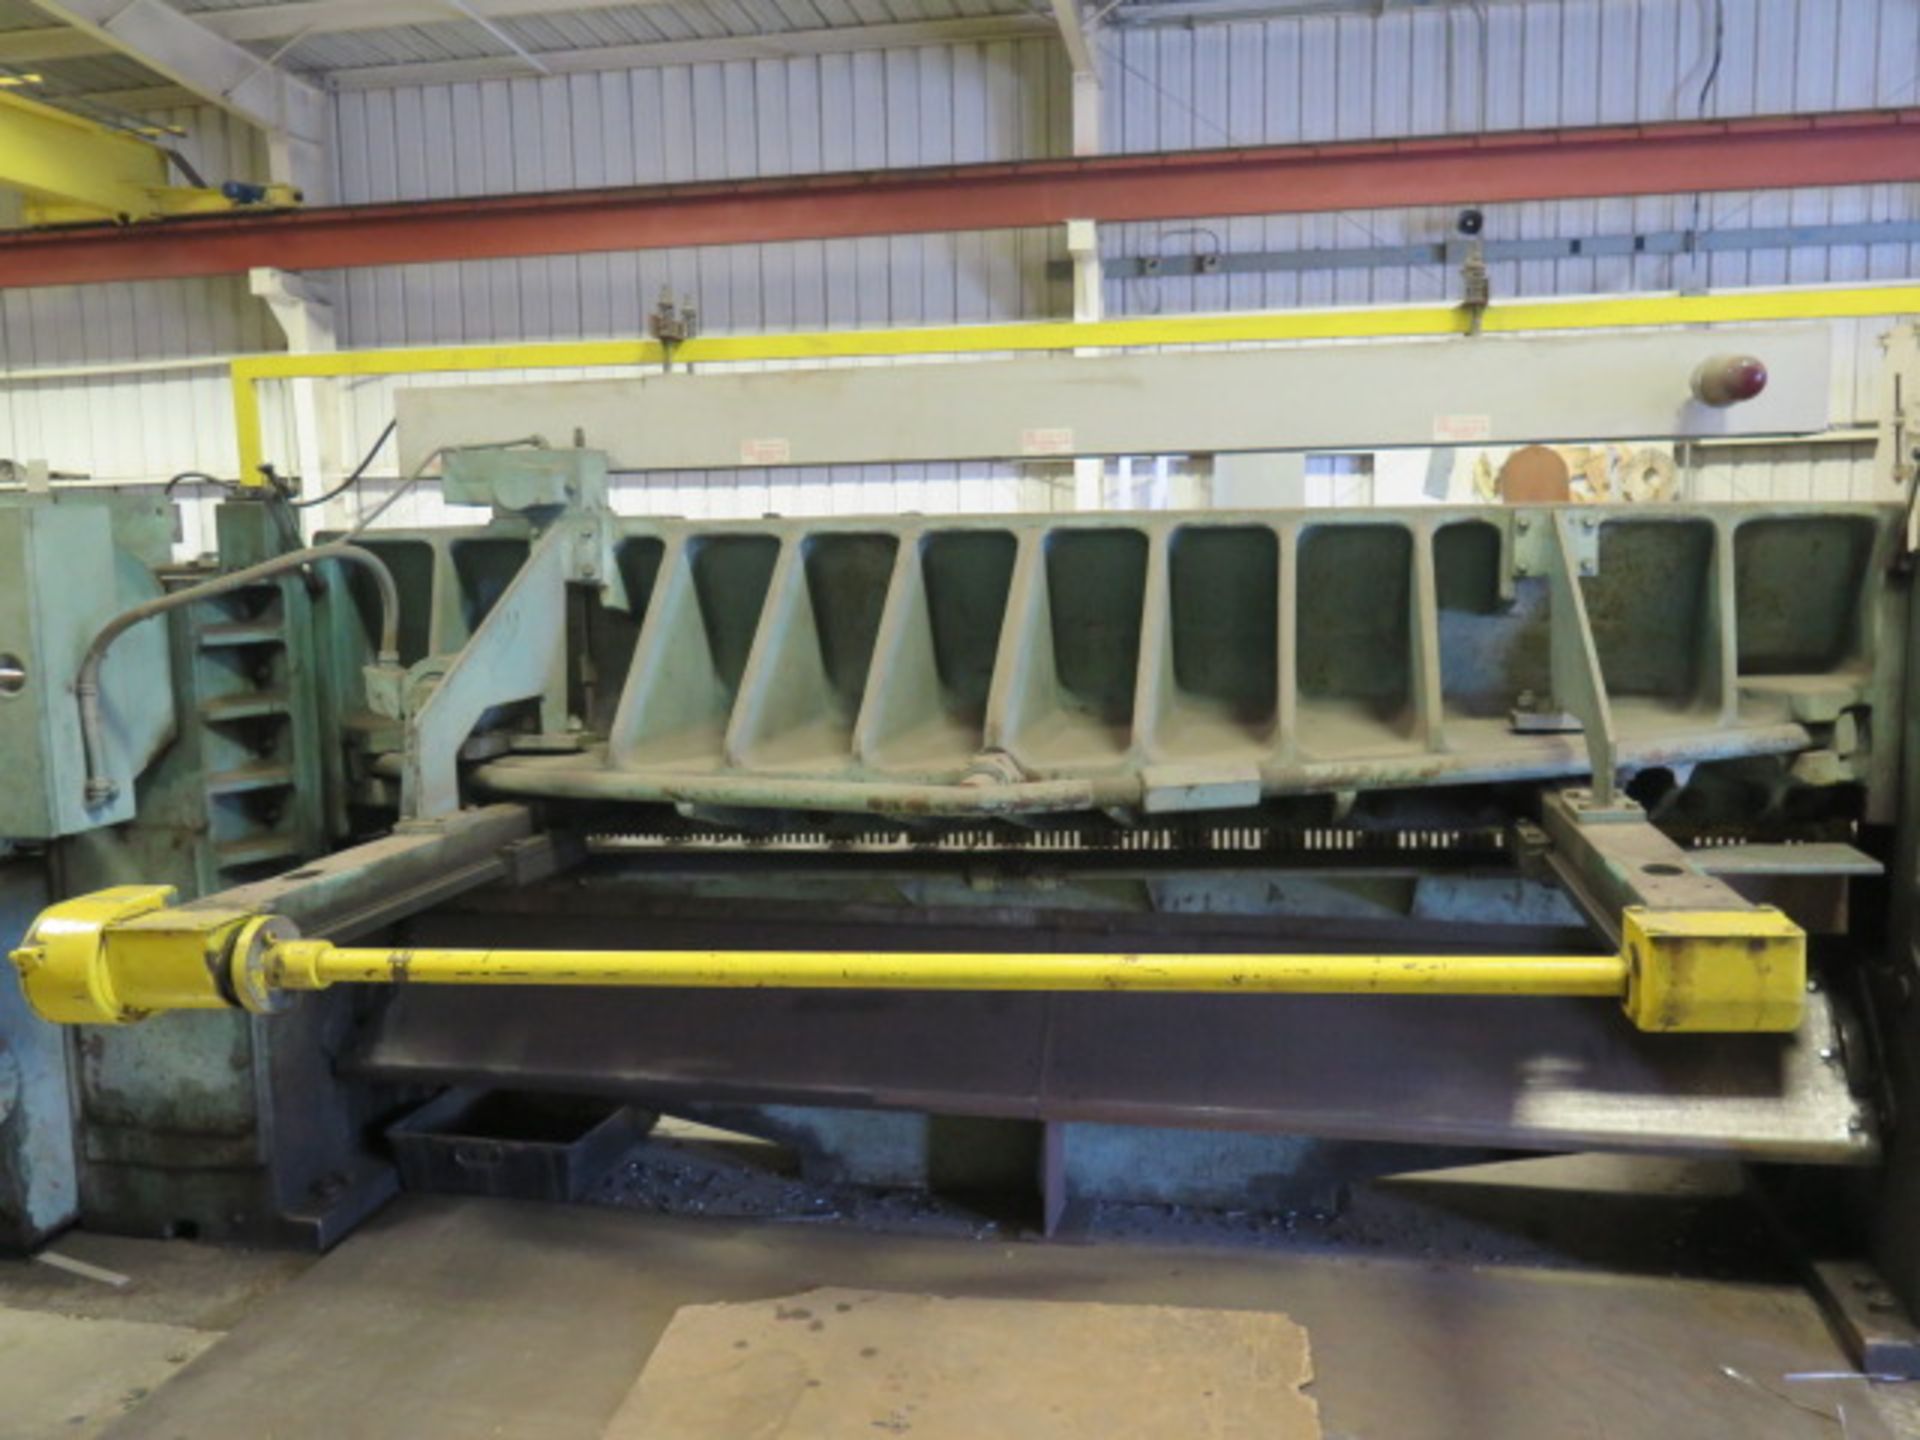 Wysong mdl. 1038 3/8" Cap x 10' Power Shear s/n P31-149 w/ Power Back gauge, 107" Sq Arm, SOLD AS S - Image 7 of 9